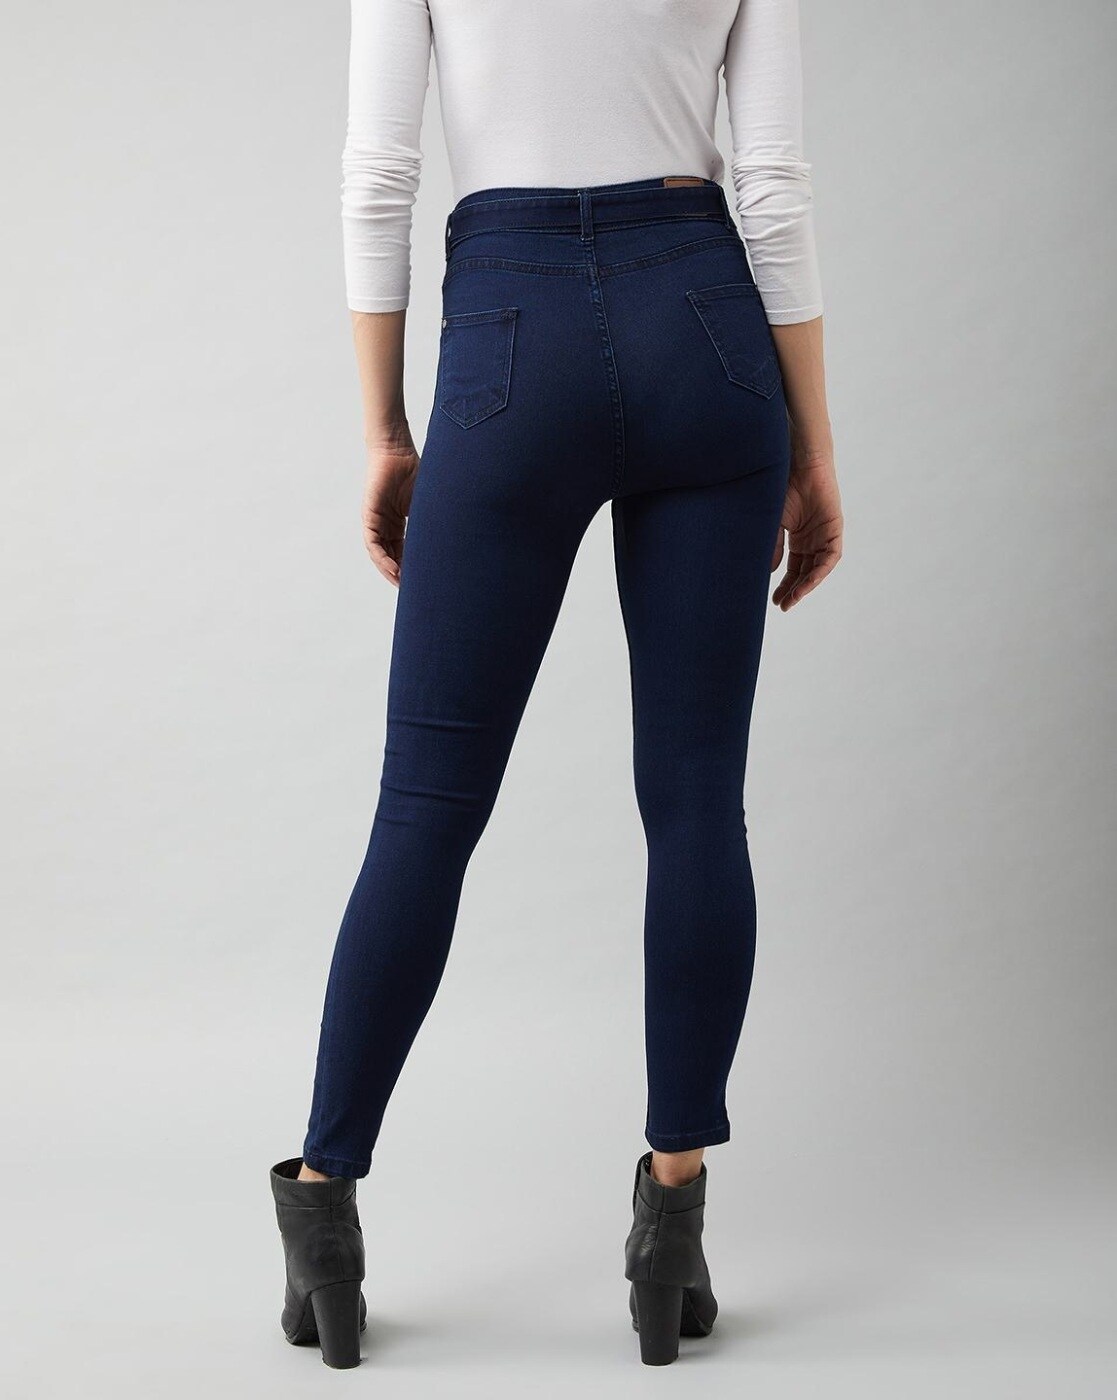 Buy Navy blue Jeans & Jeggings for Women by MISS CHASE Online